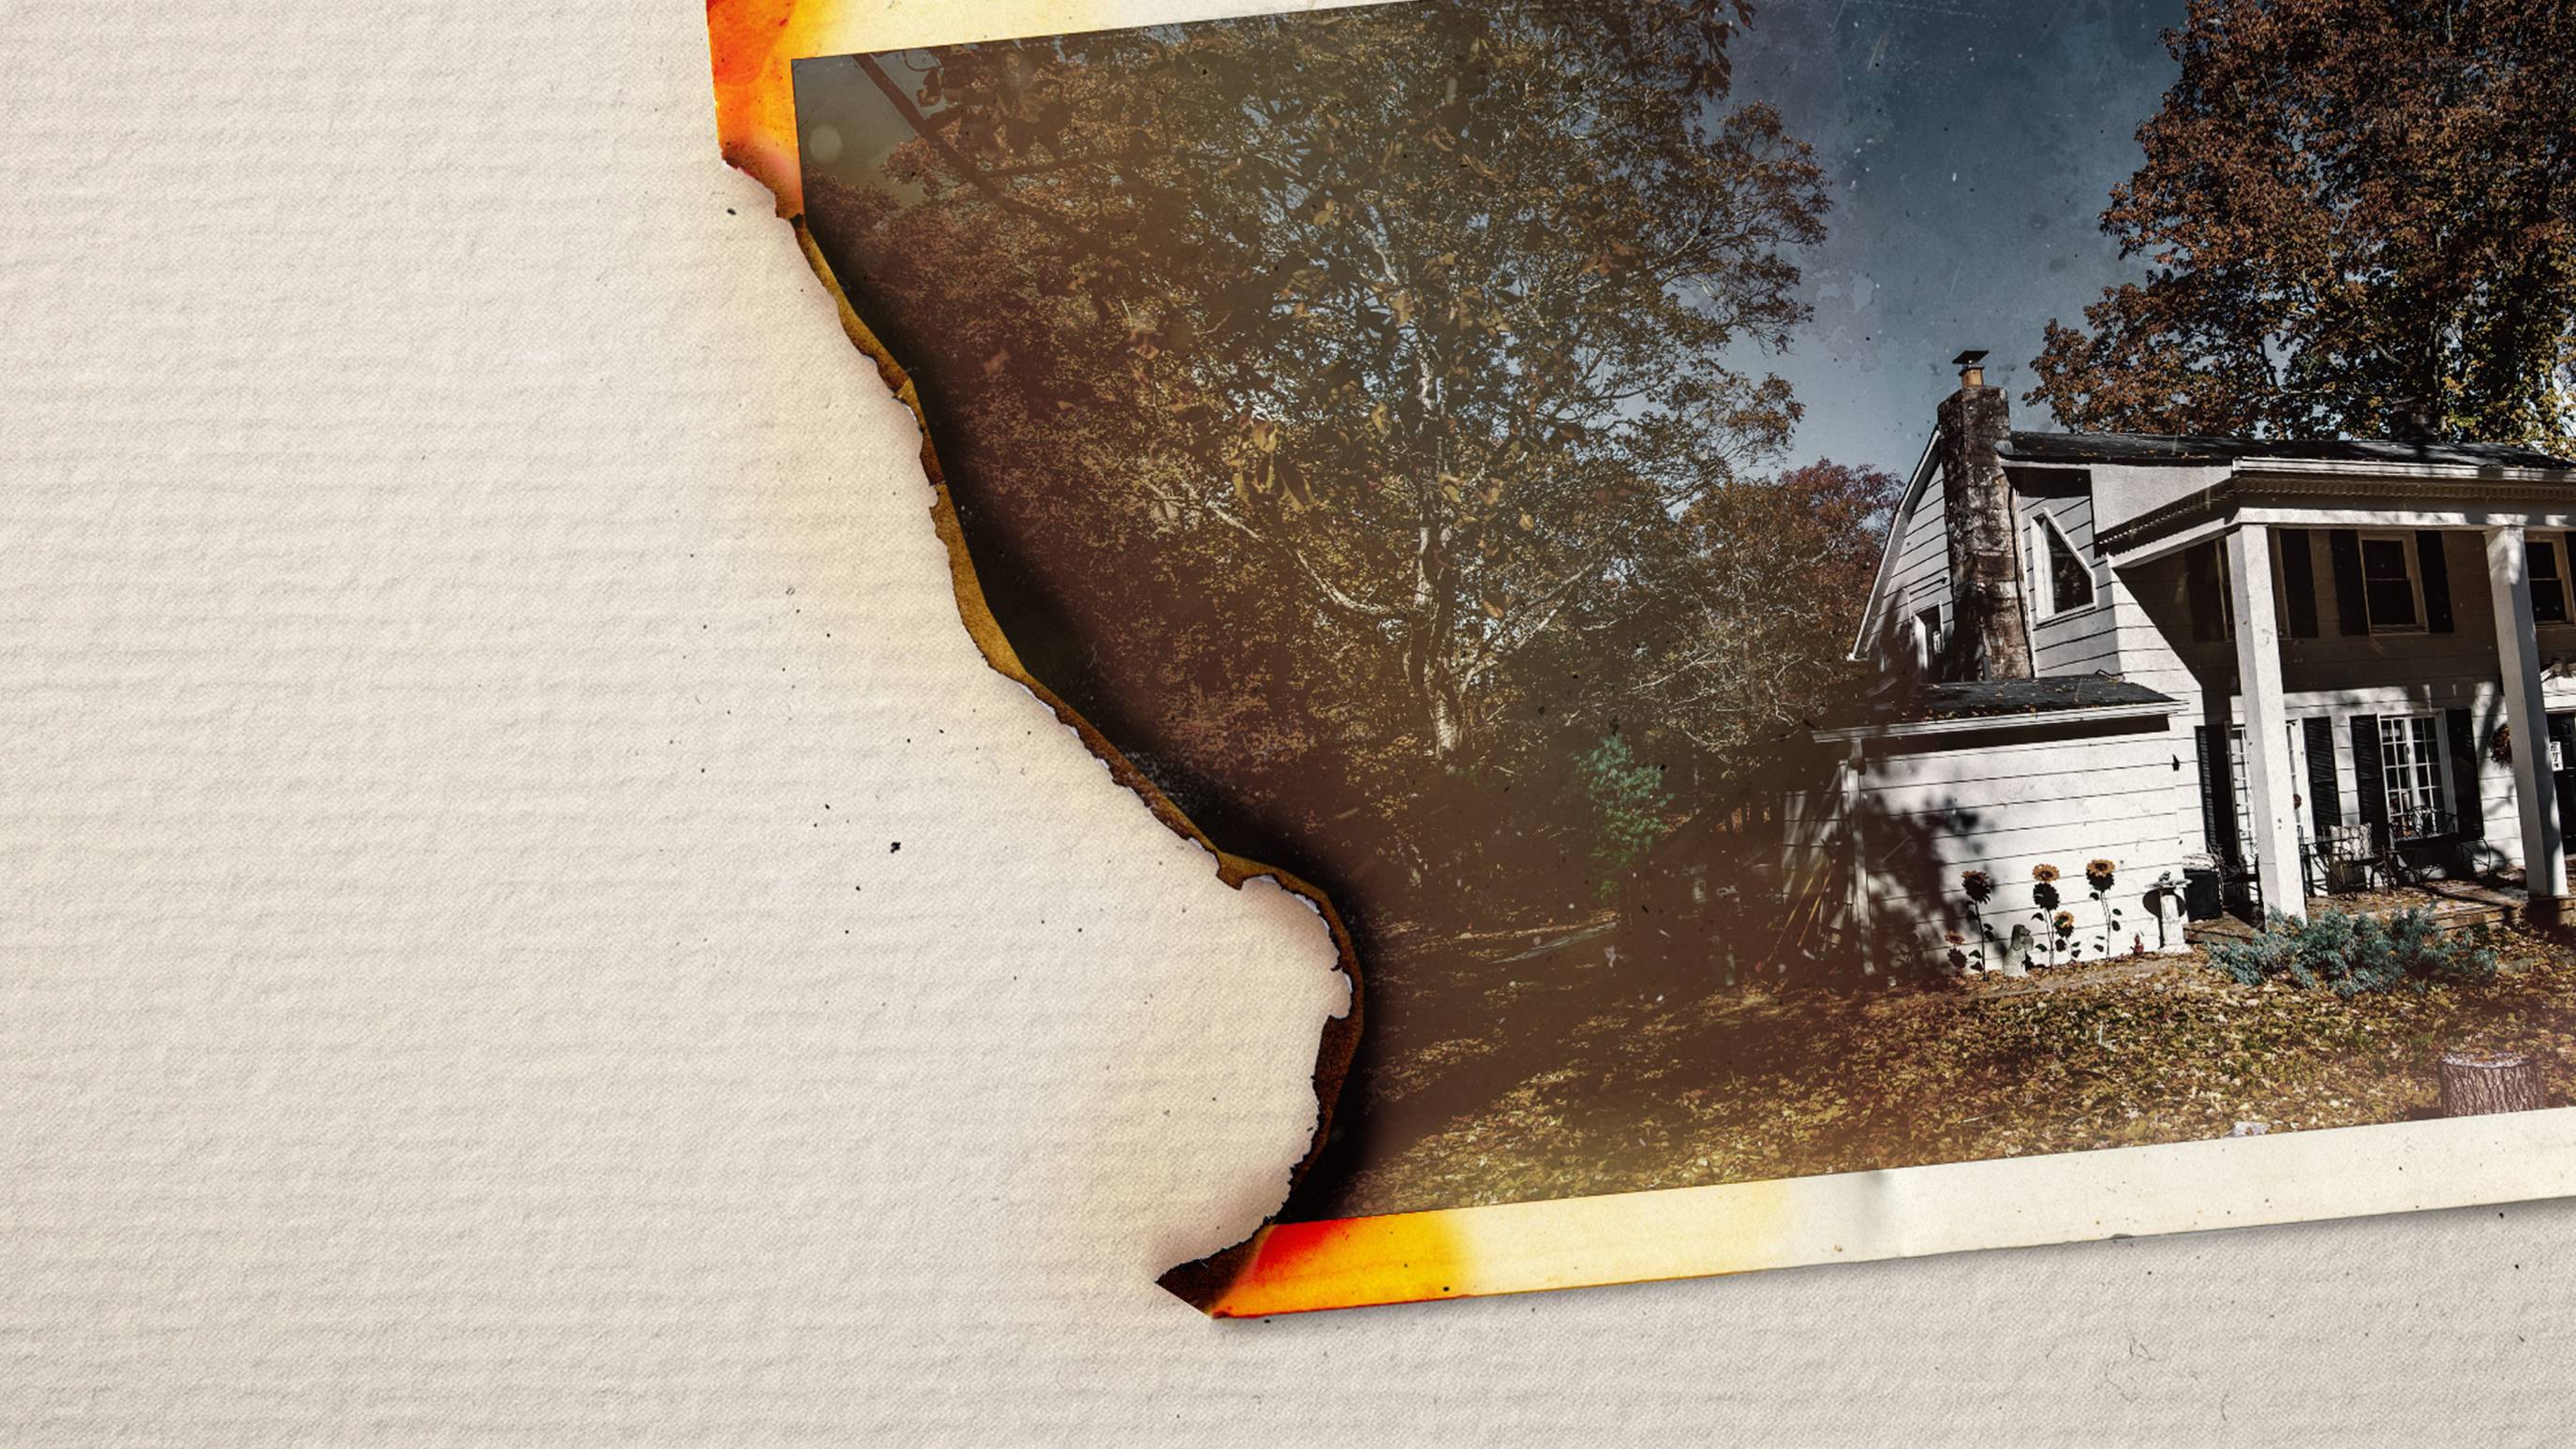 Stream Kentucky Murder Mystery The Trials of Anthony Gray discovery+